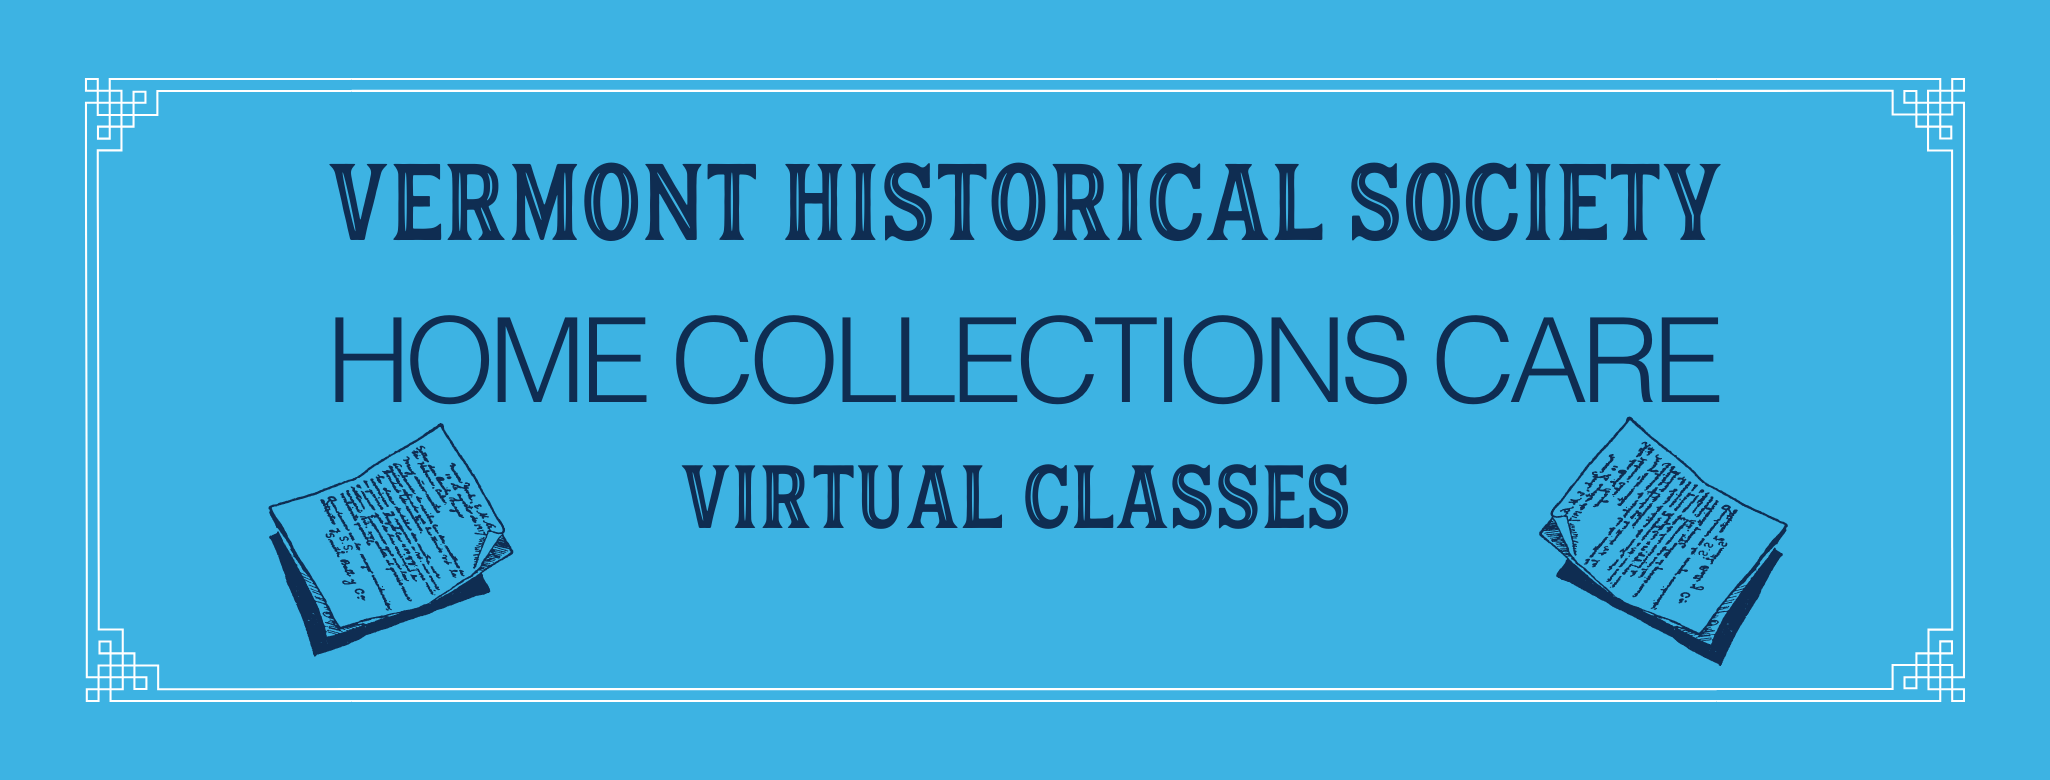 Vermont Historical Society home collections care virtual classes.